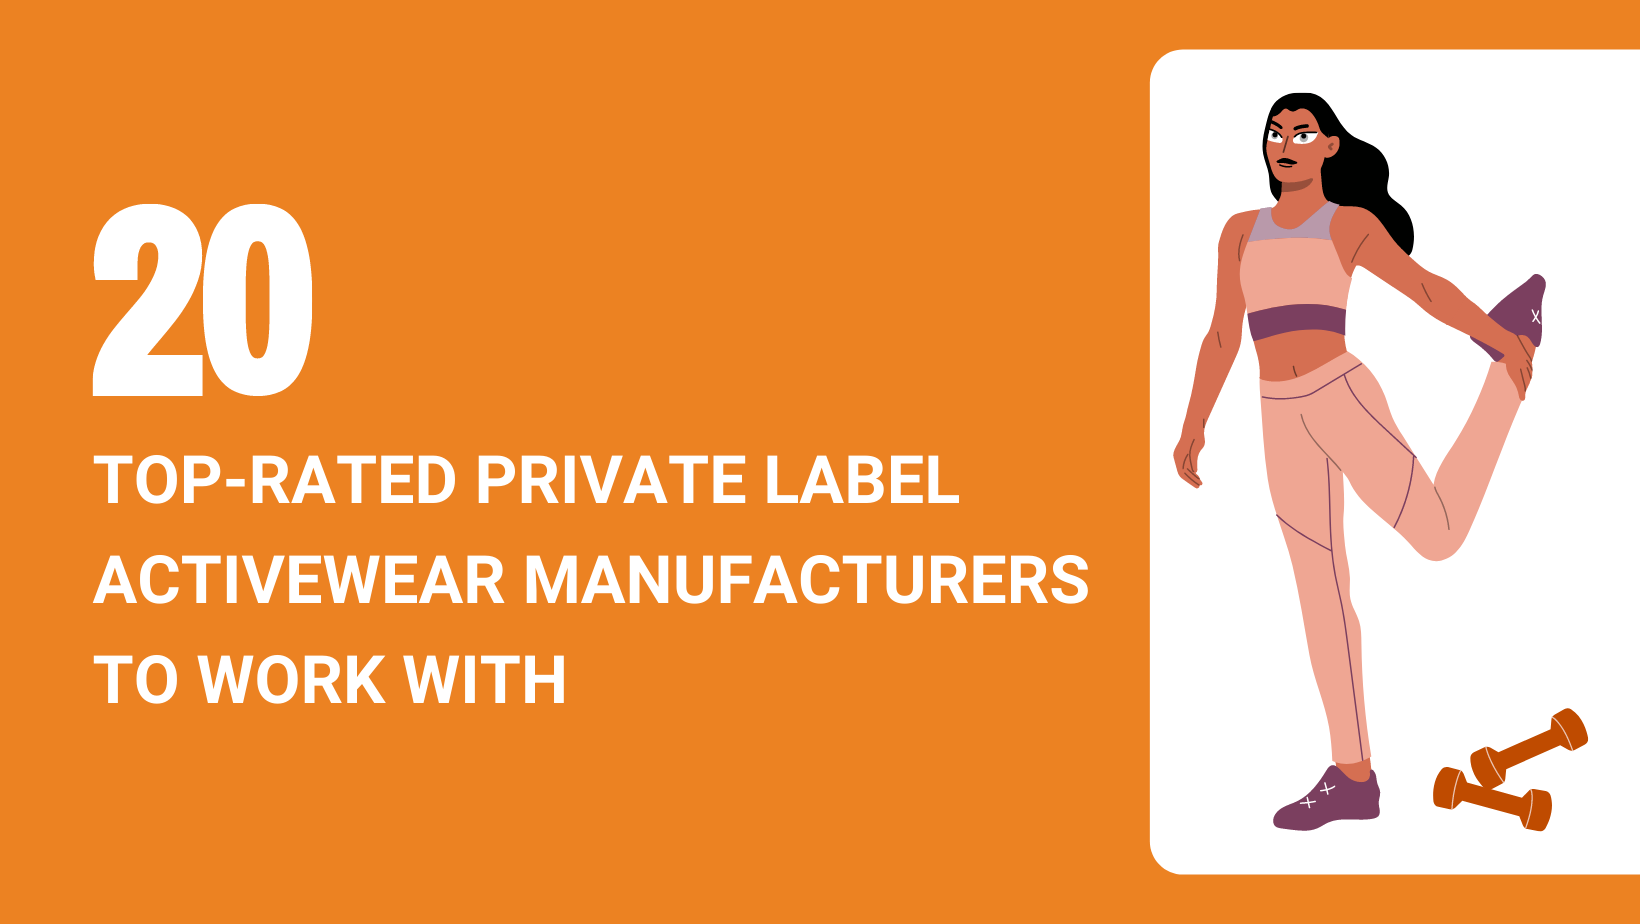 20 Top-rated Private Label Activewear Manufacturers to Work With in 2023